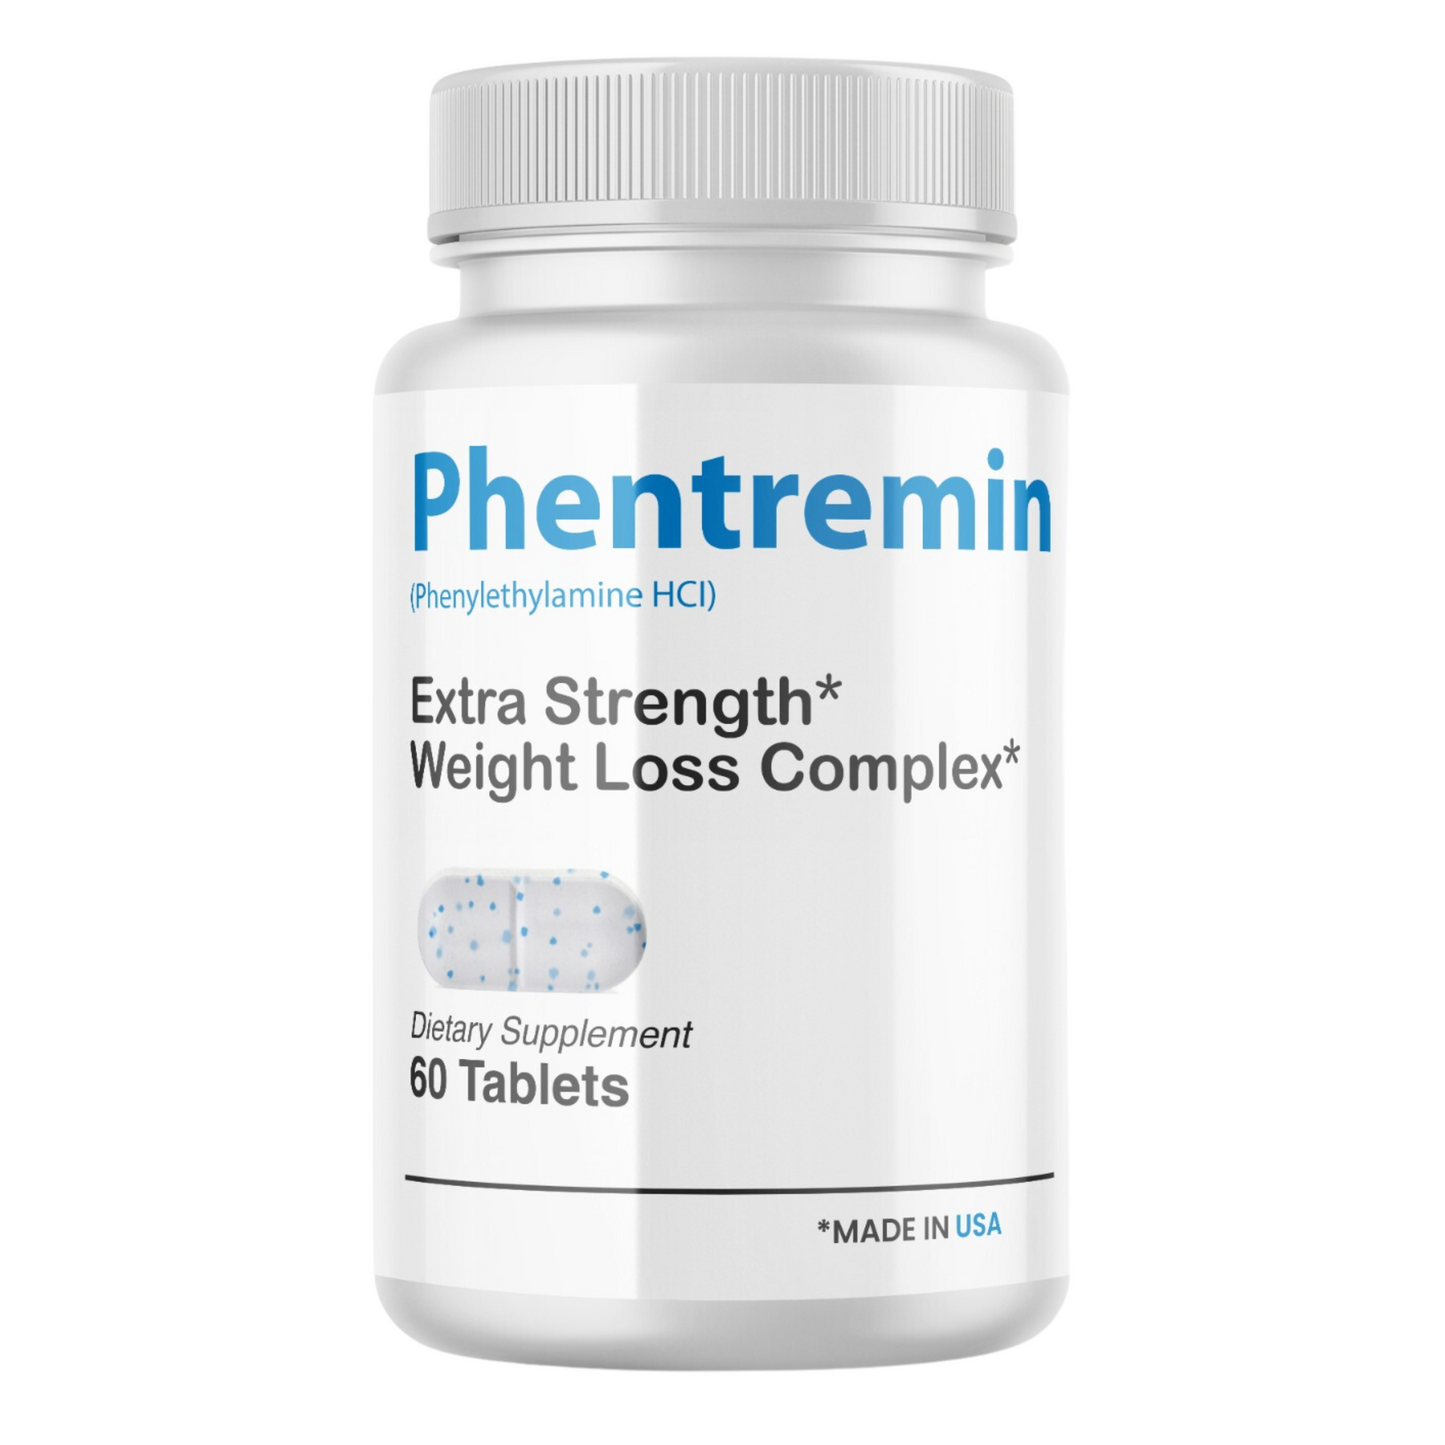 Phentremin - The Official Fat Burner - 2 Bottle Supply Professional Grade Ingredients